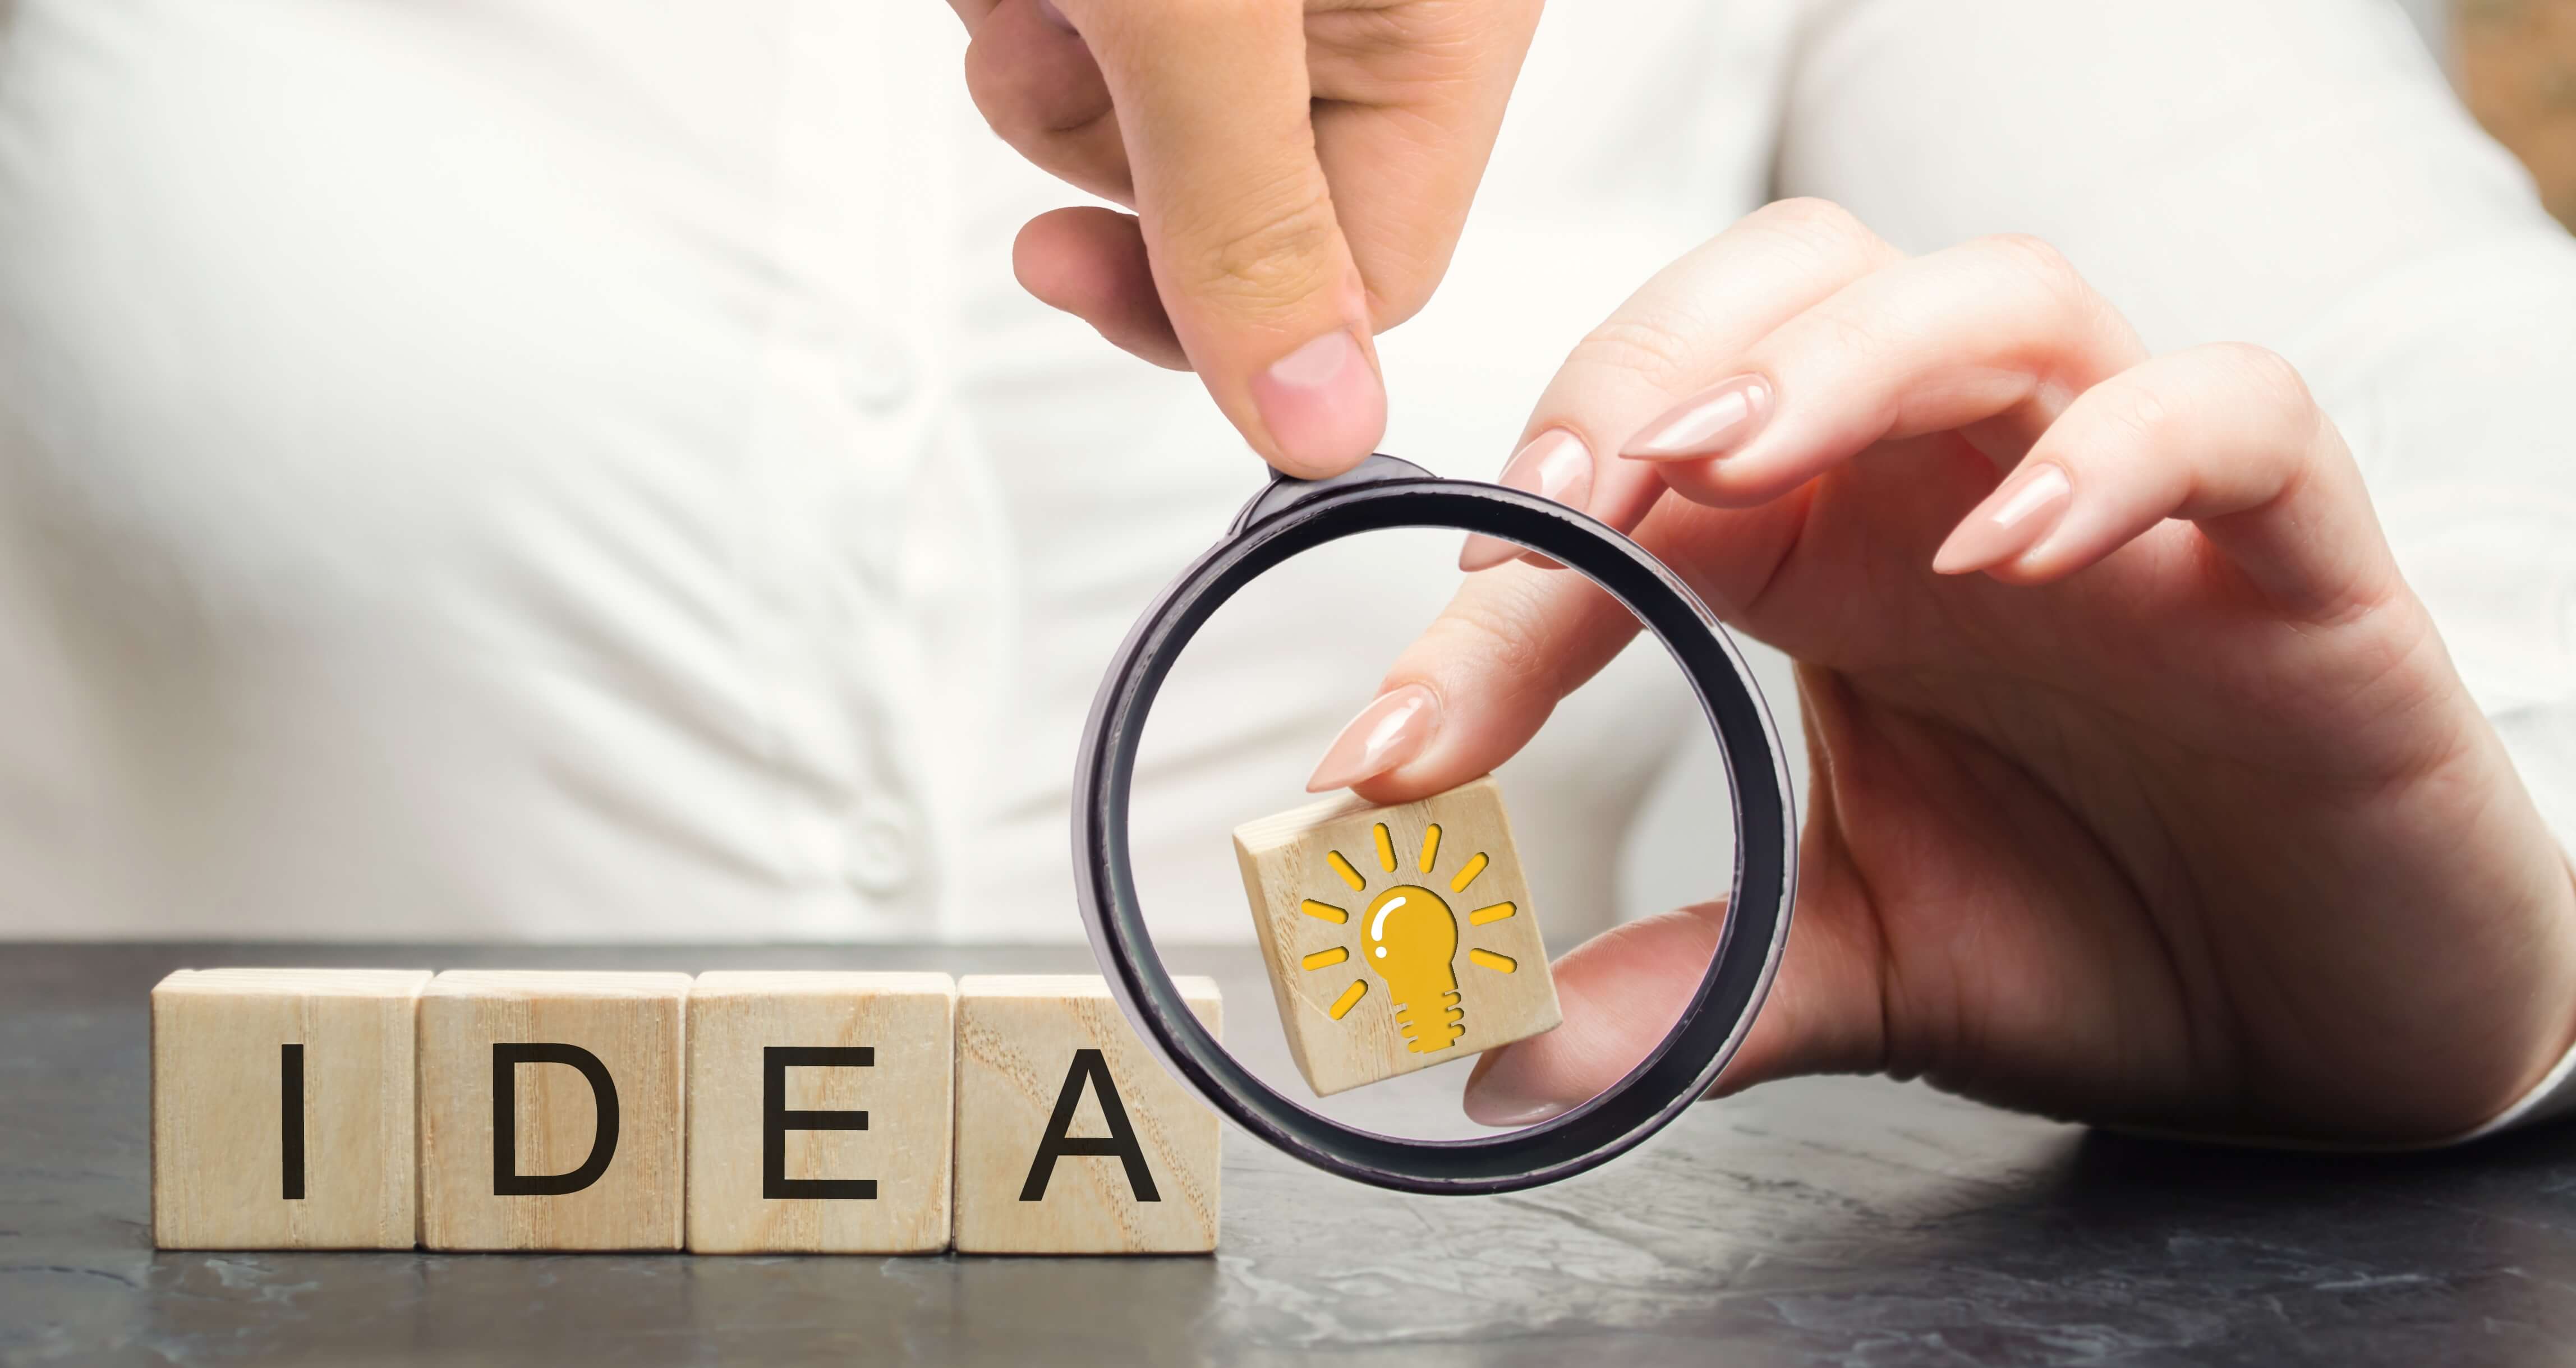 How To Patent An Idea: 4 Key Steps To Patenting